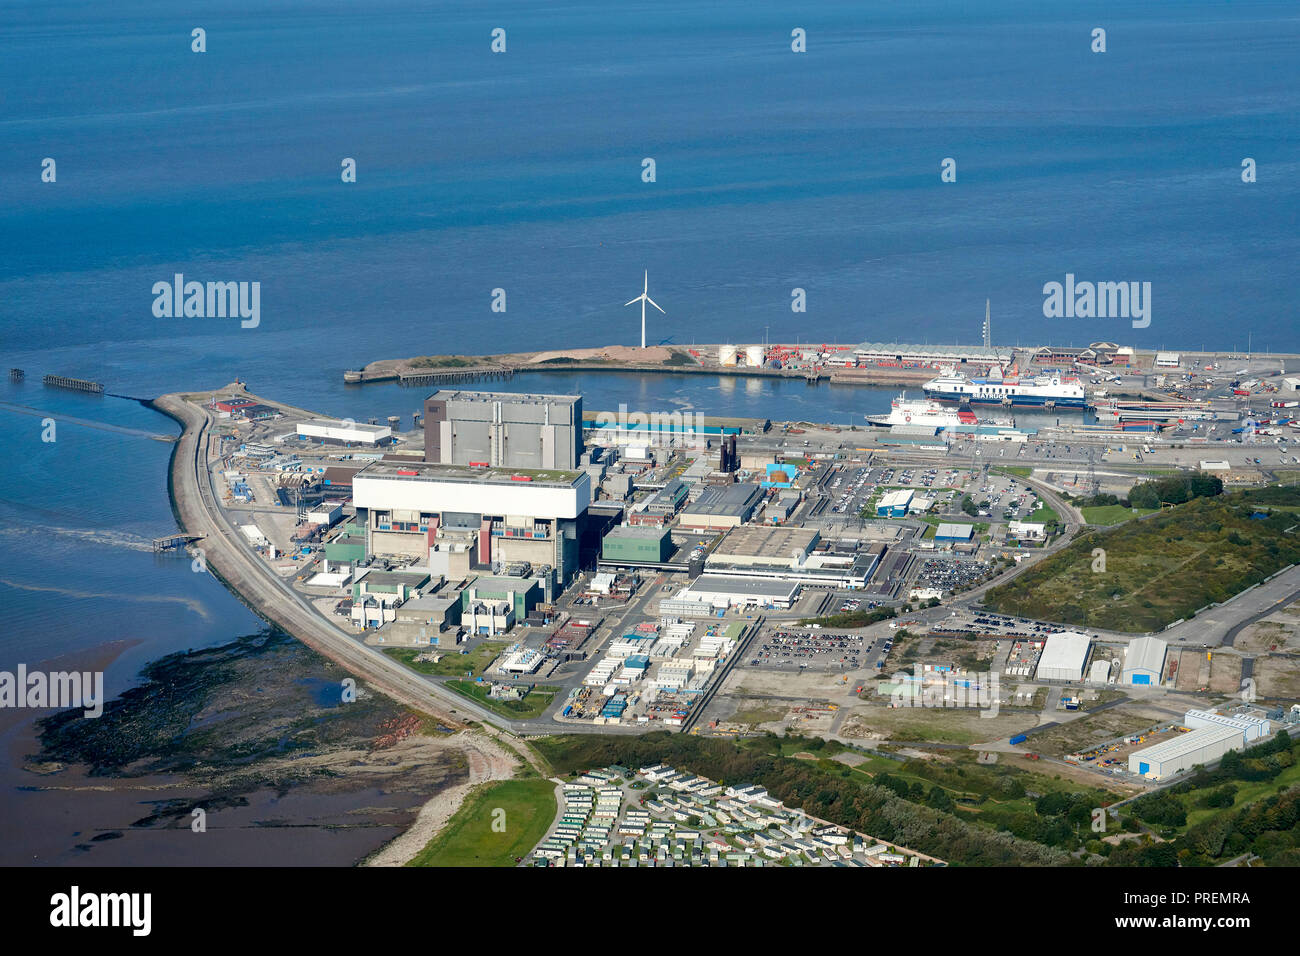 An aerial photo of Heysham Port, north west England, UK, on the edge of Morecambe bay, Isle of Man ferry in port, Nuclear power station prominent Stock Photo